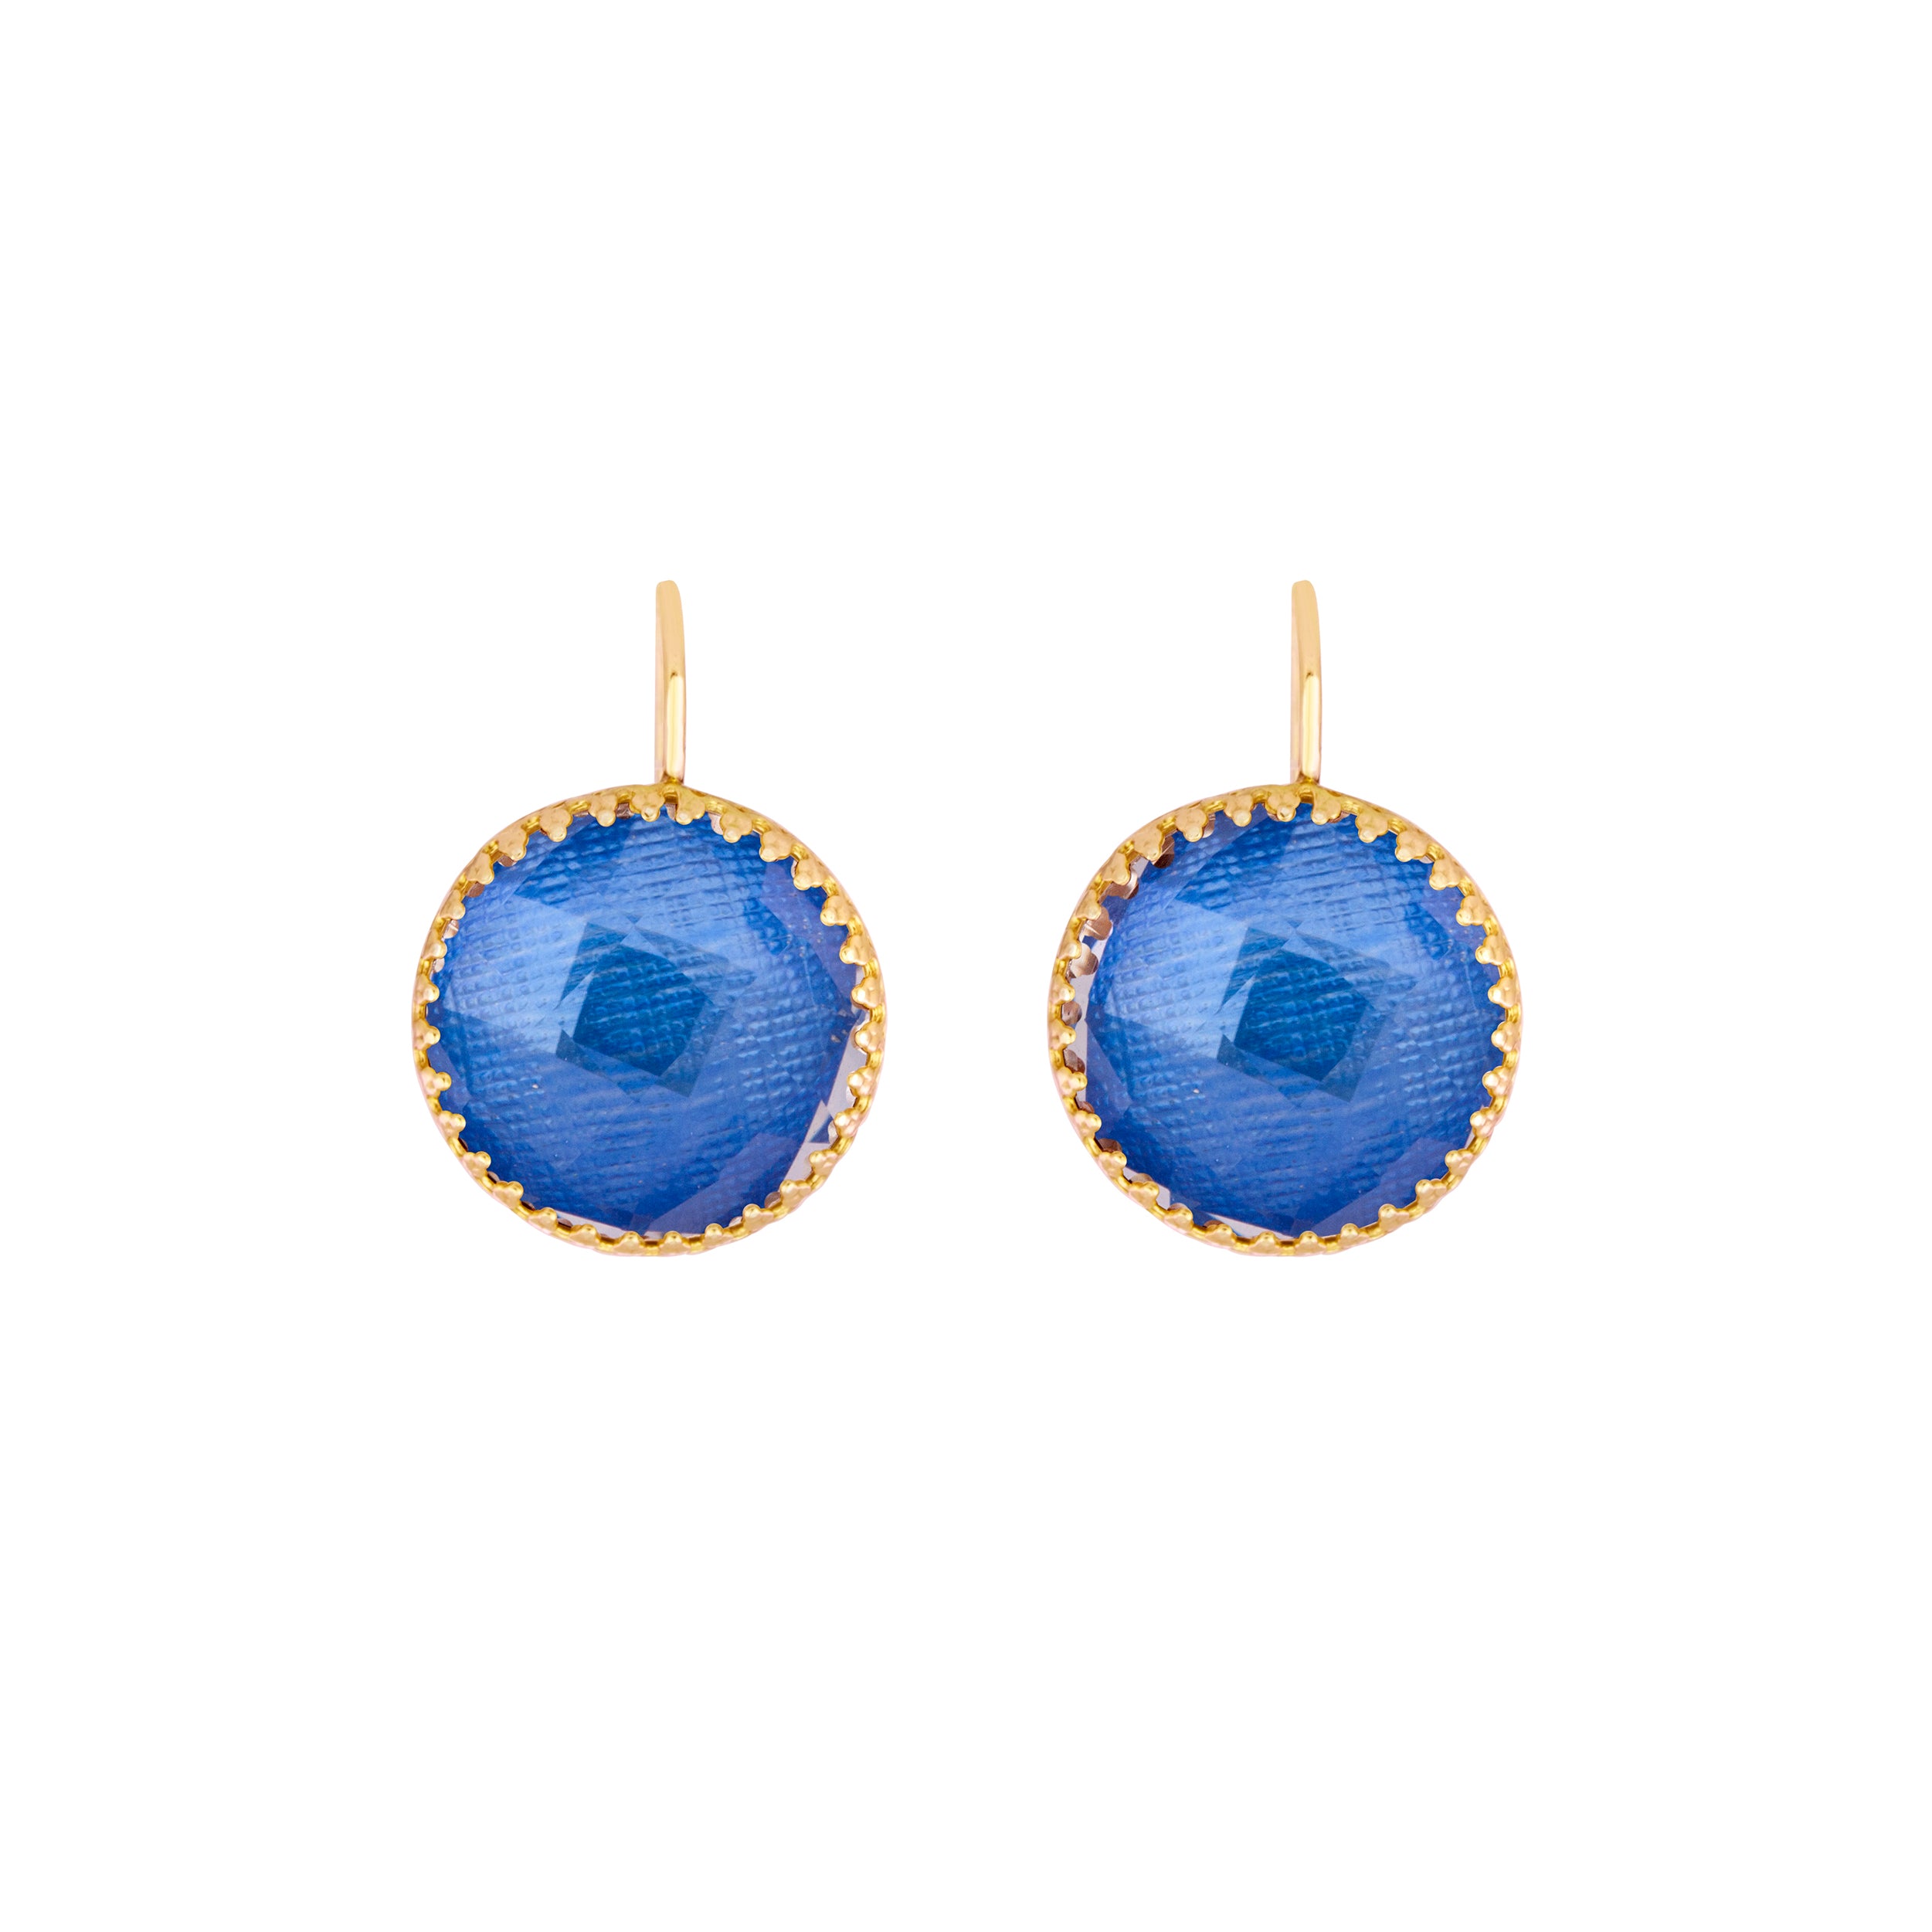 Olivia Button Earrings (Black Rhodium, Yellow, or Rose Gold Wash)